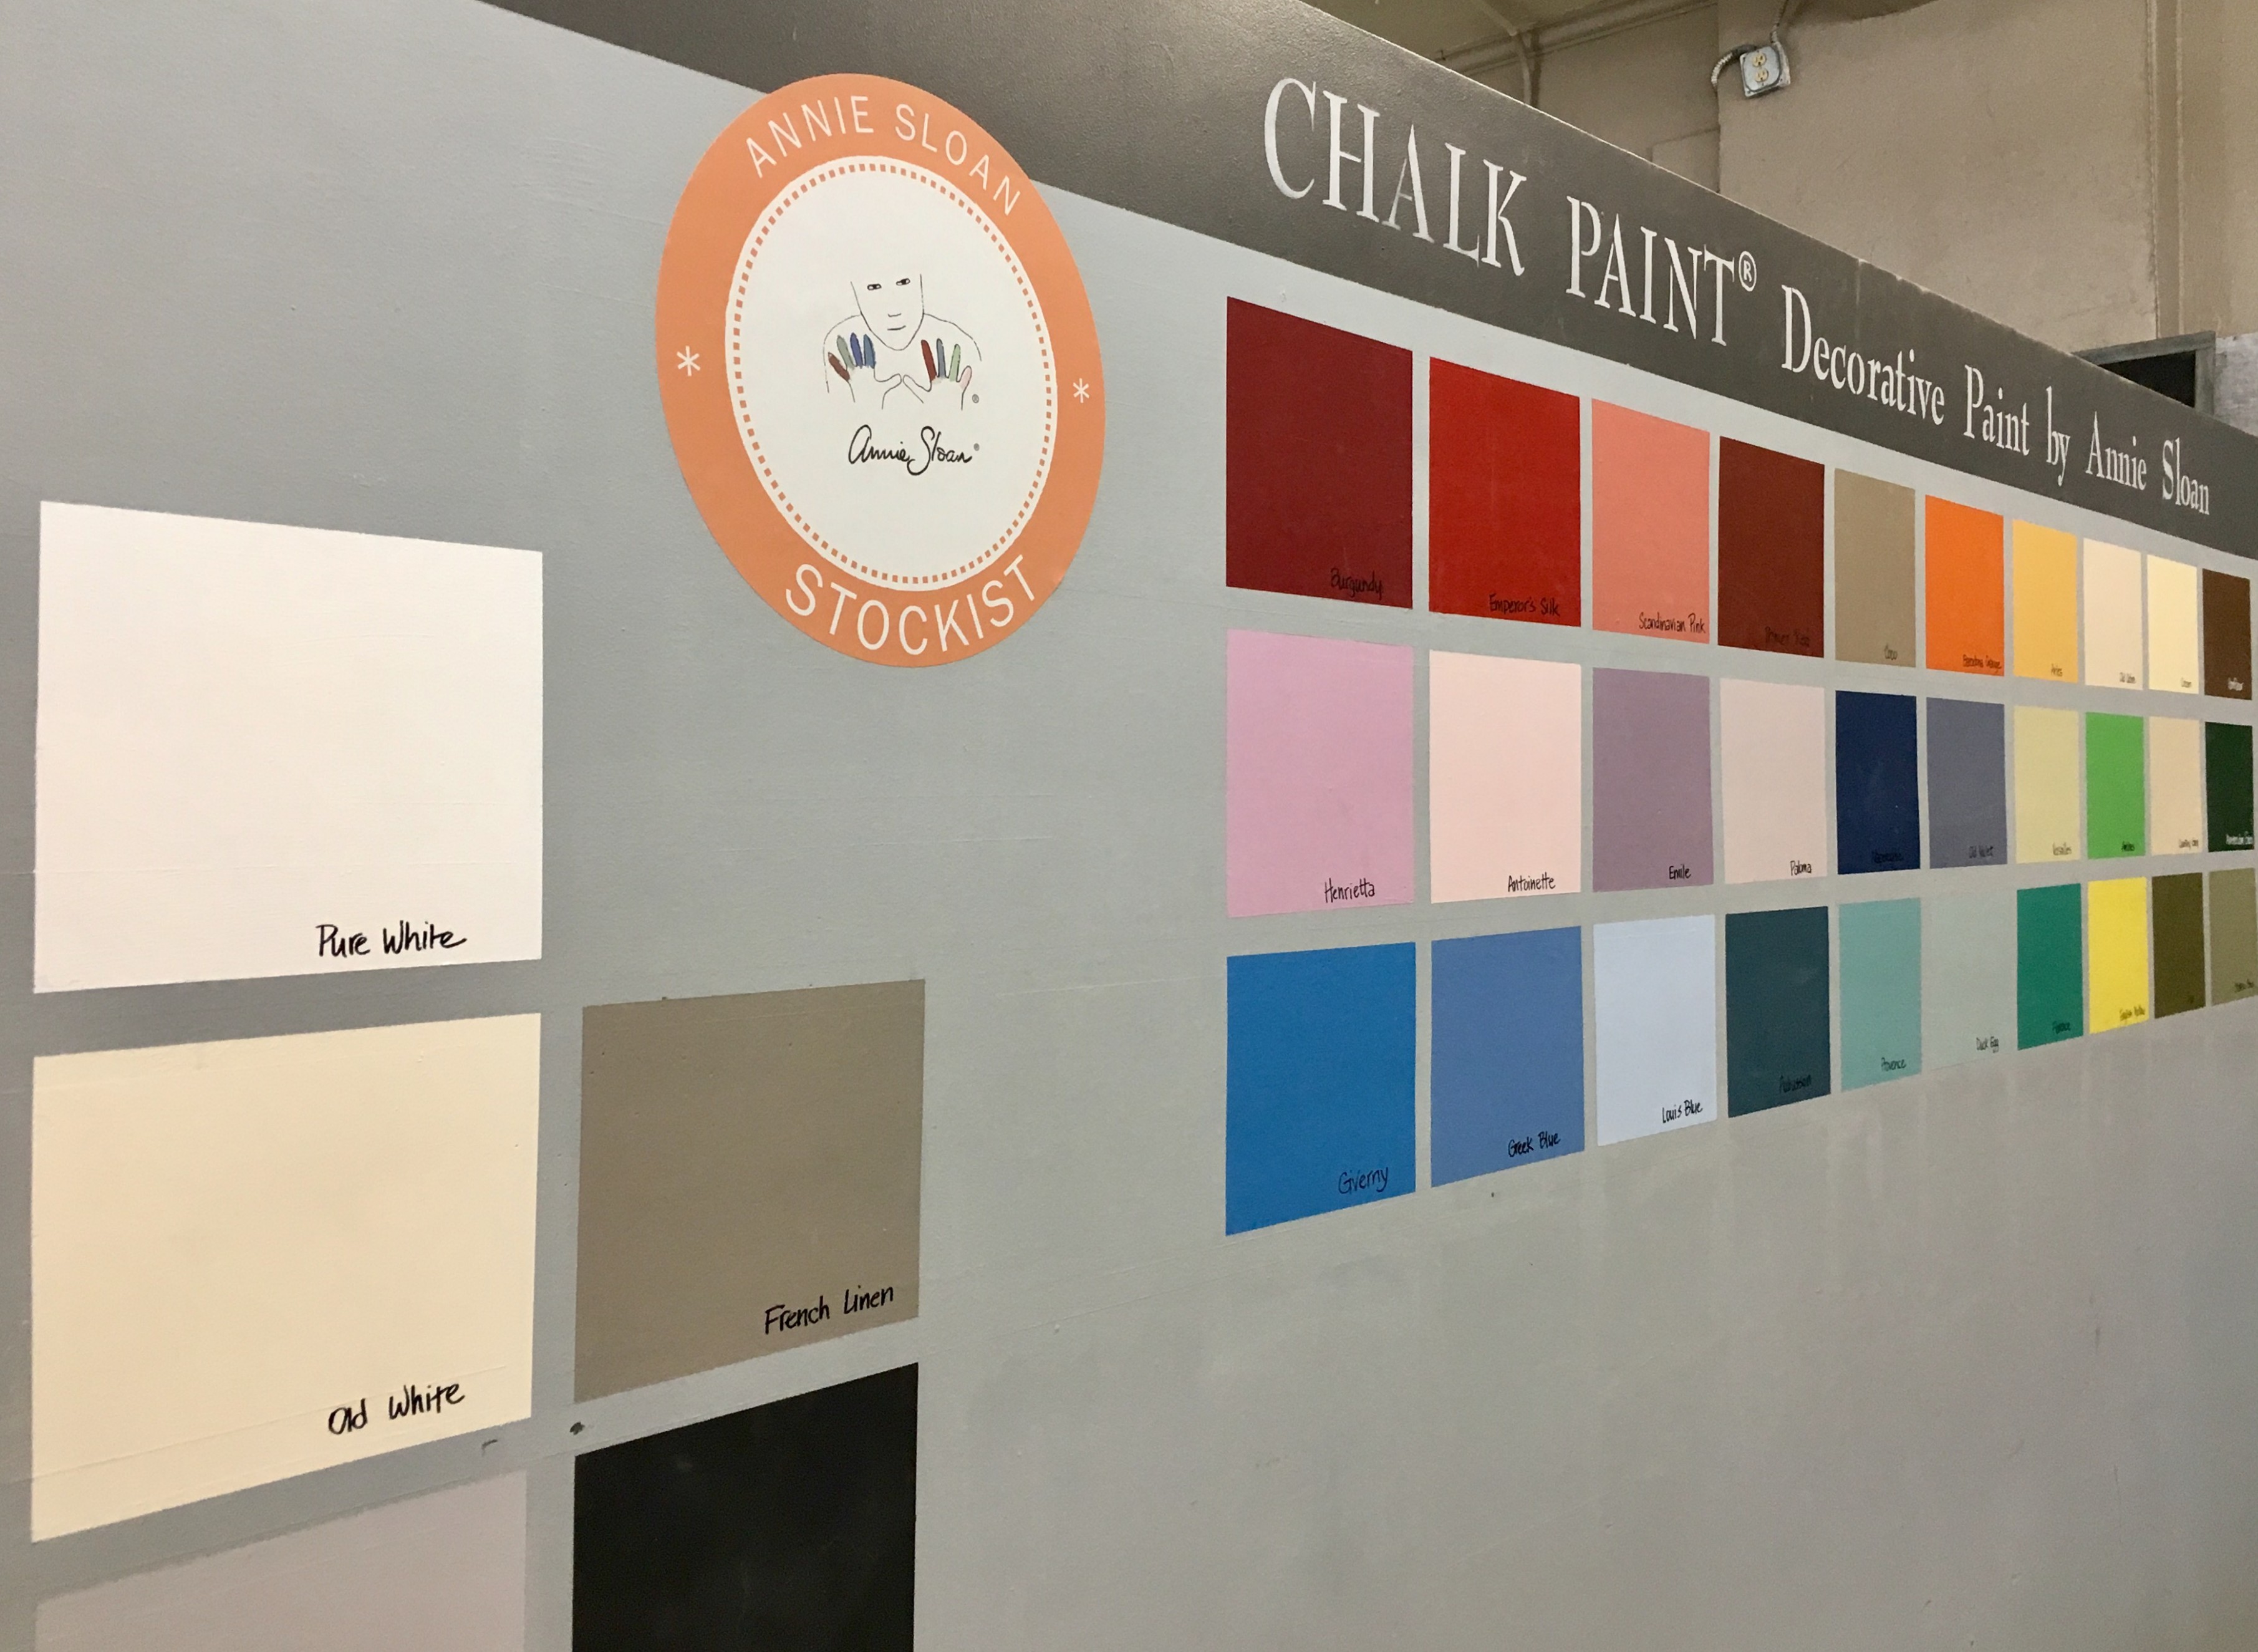 Metheny Weir | Chalk Paint® By Annie Sloan Where Can I Buy Annie Sloan Chalk Paint From